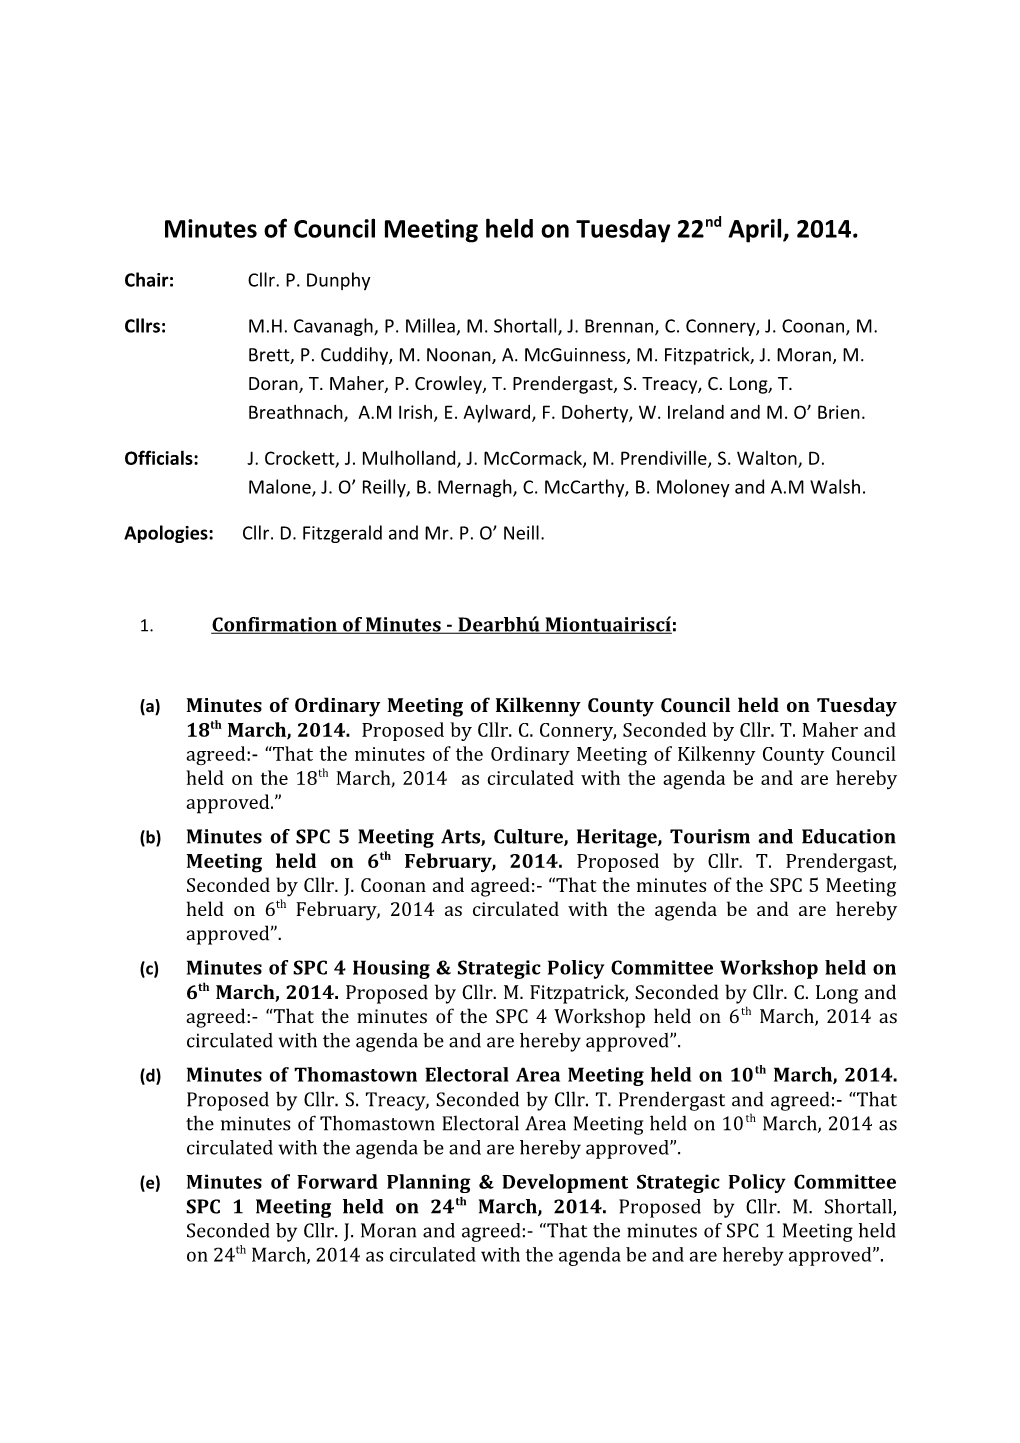 Minutes of Council Meeting Held on Tuesday 22Nd April, 2014